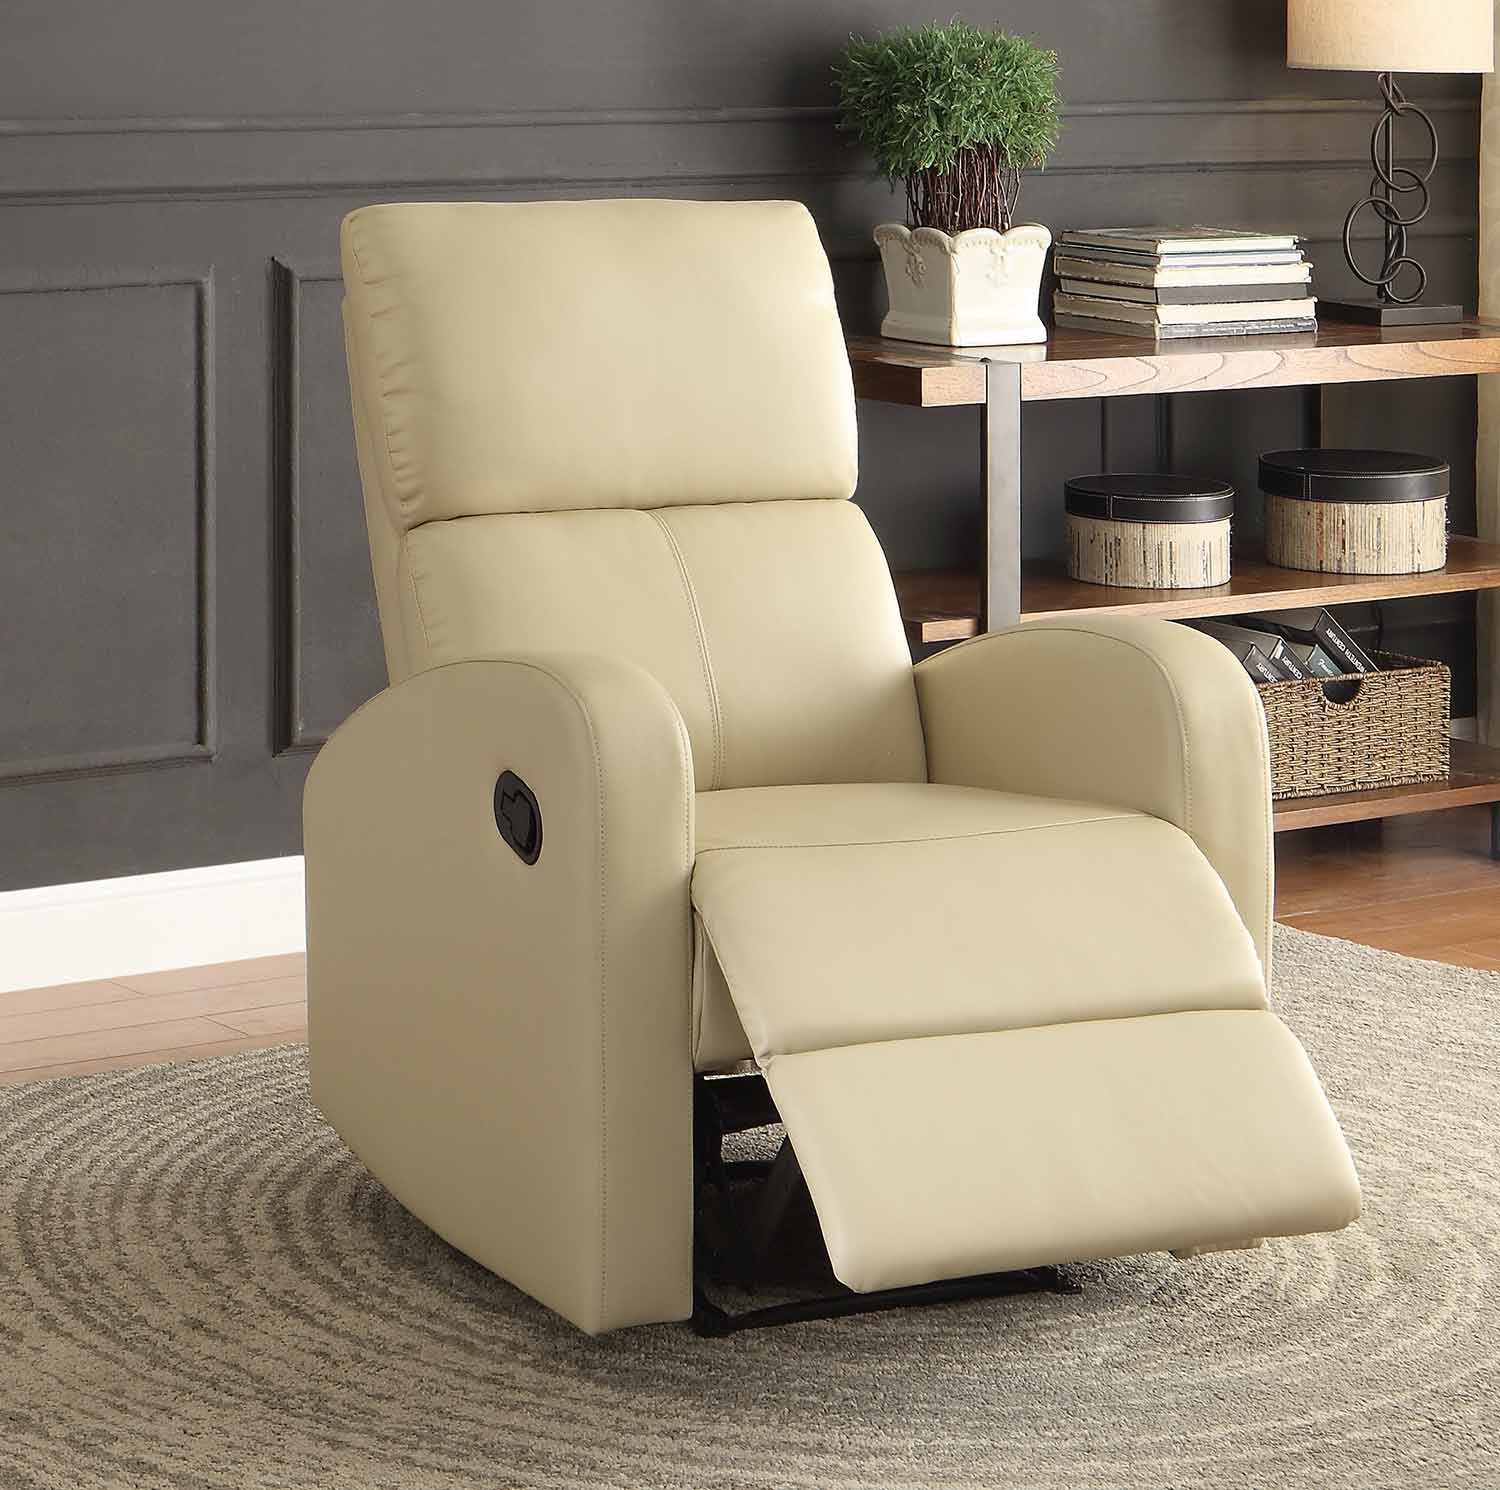 Homelegance Mendon Reclining Chair - Taupe